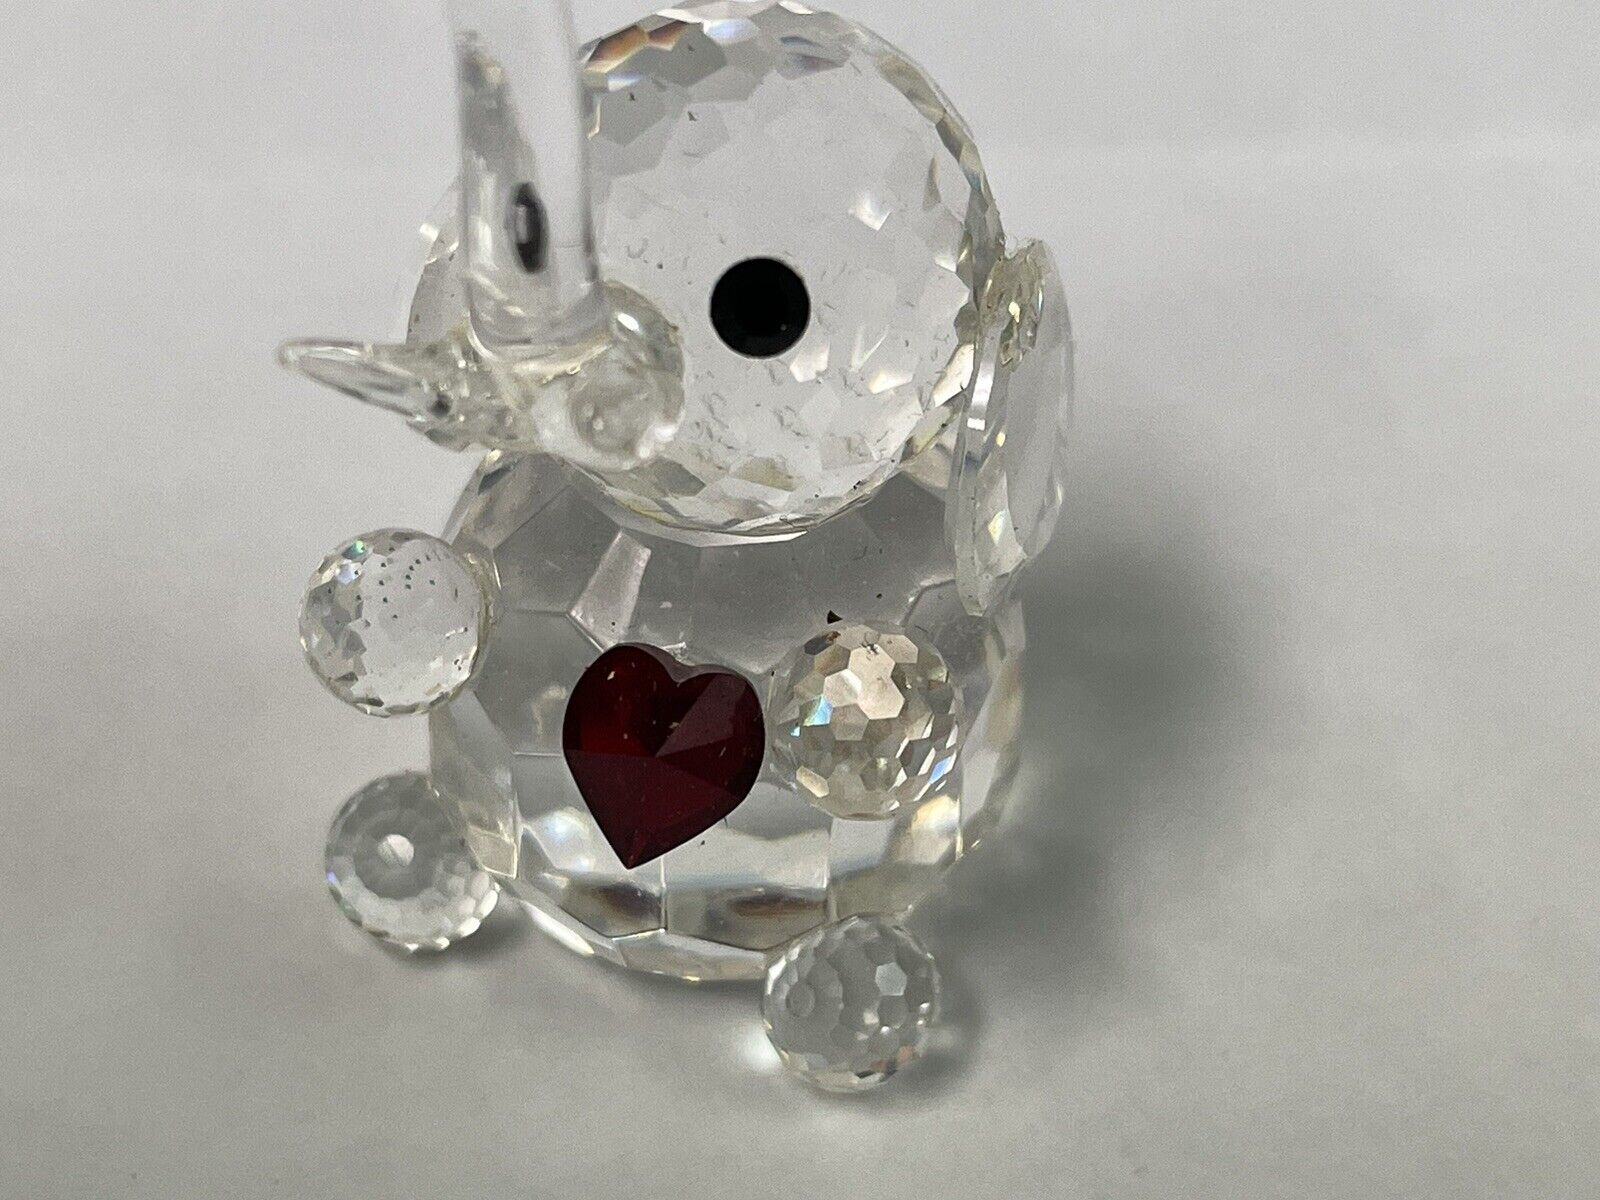 Mini Crystal Elephant Figurine With Red Ruby Colored Heart, Trunk & Tusk Intact